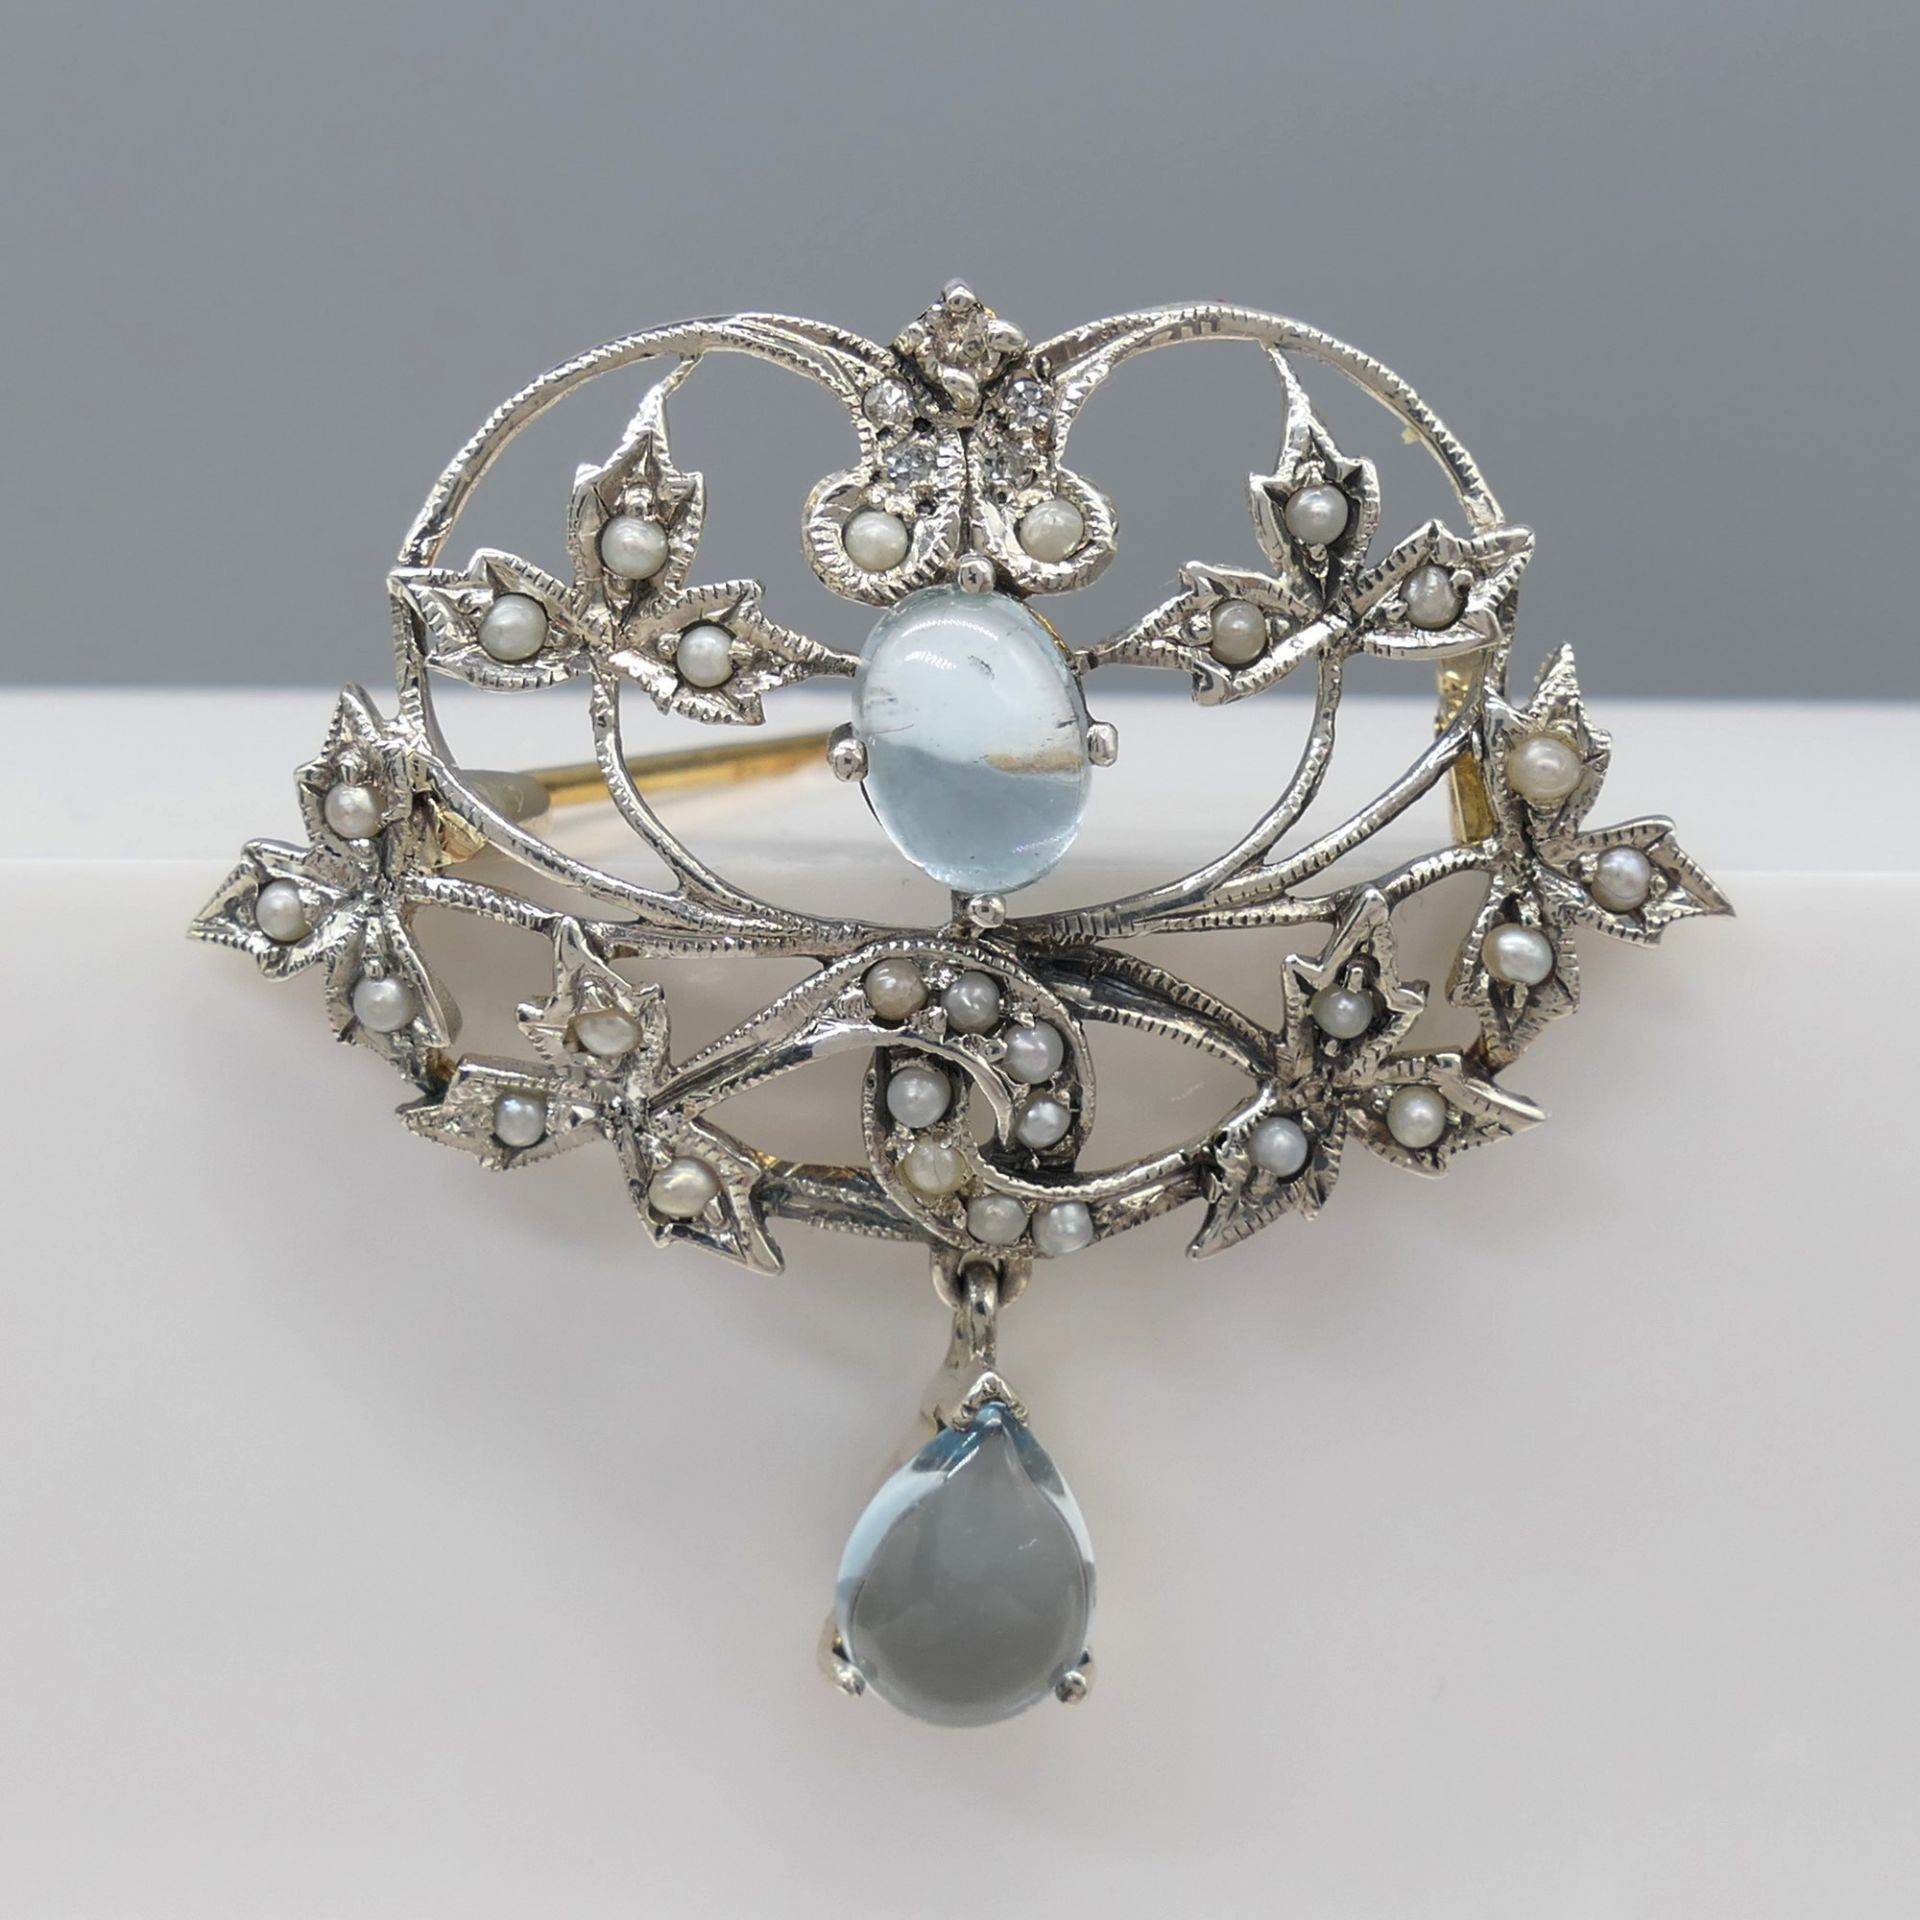 Edwardian-Style Topaz and Diamond Brooch With 2 Piece Gift Box